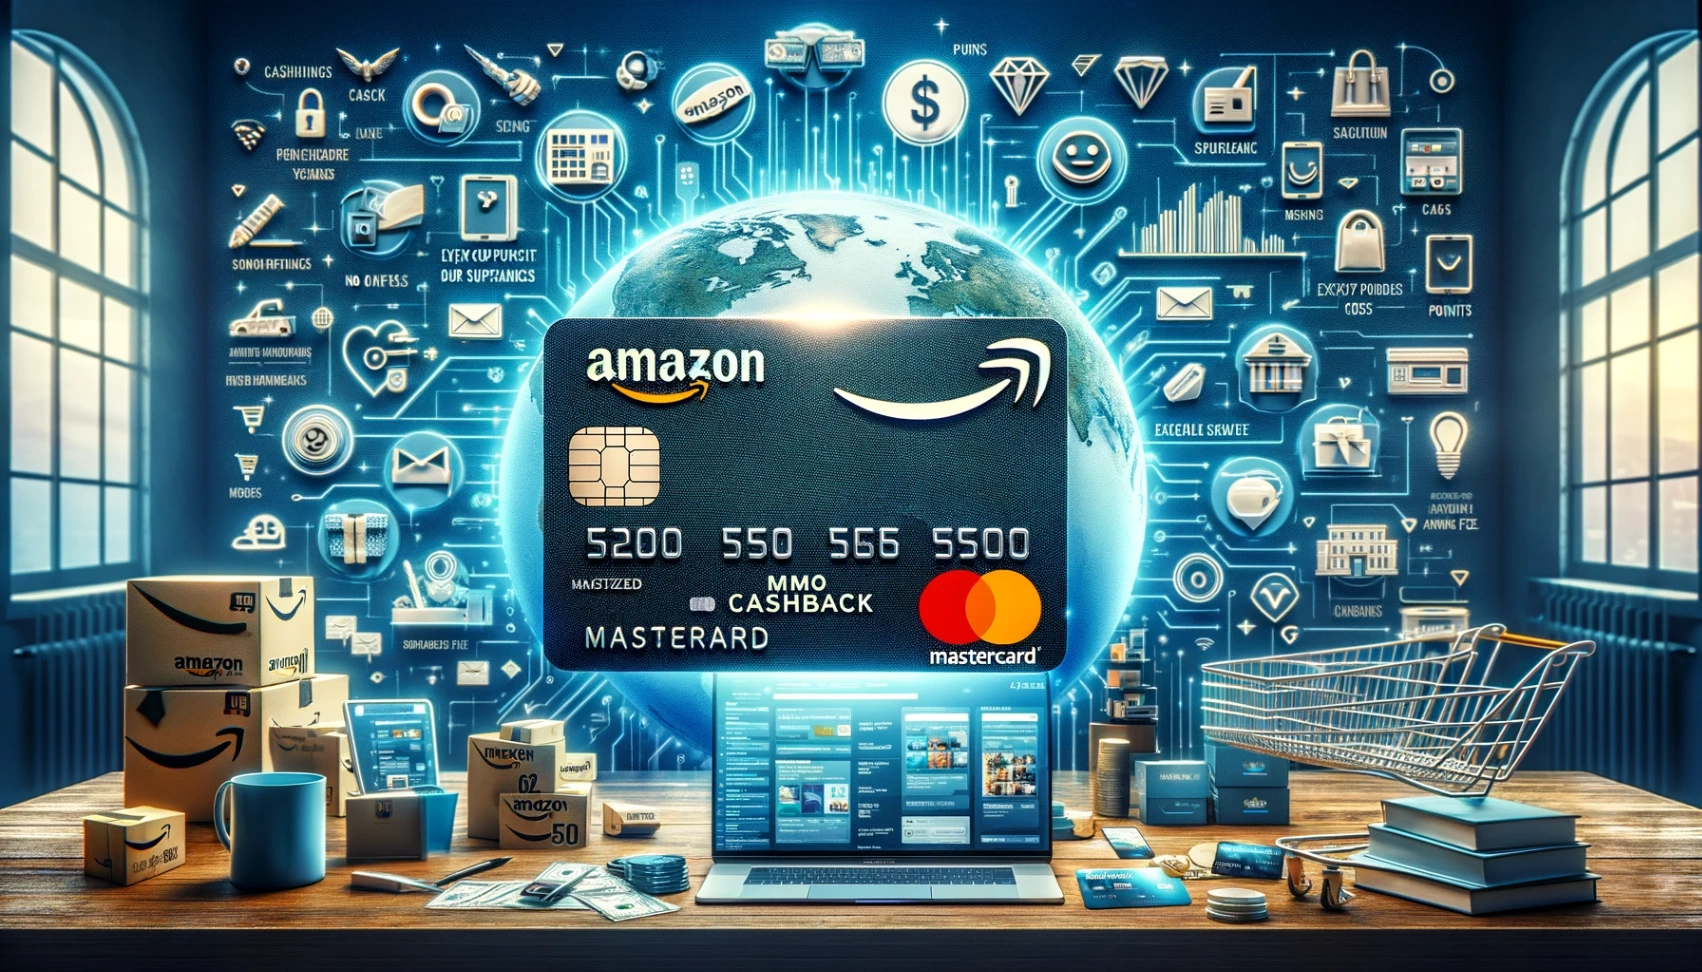 Amazon Mastercard Credit Card - How to Order Online